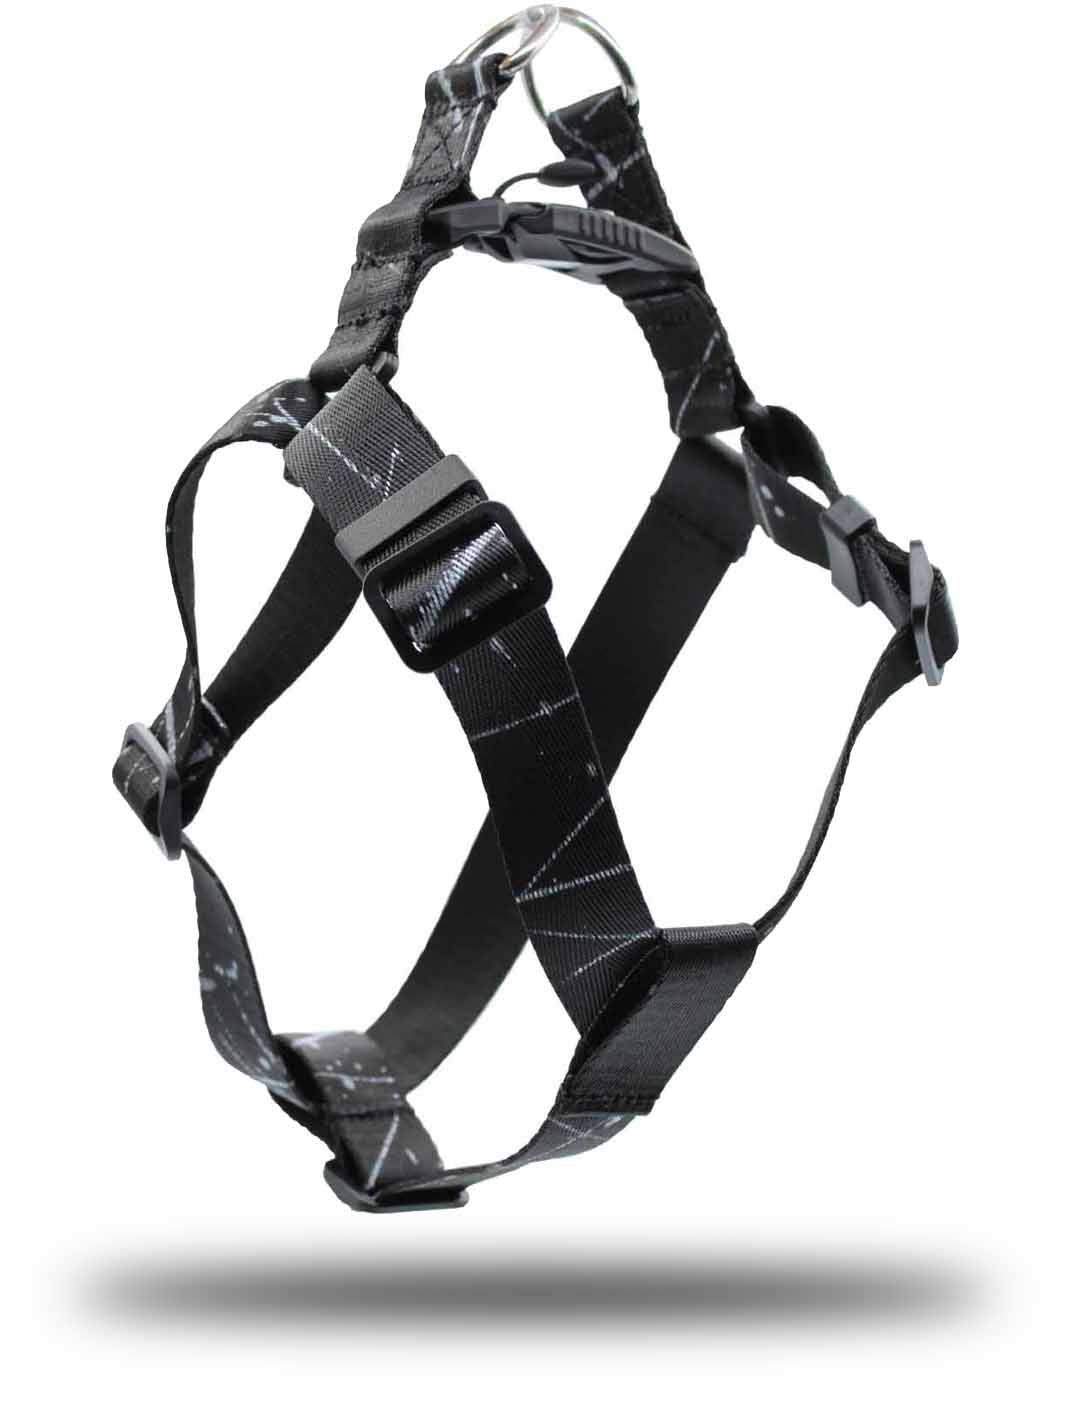 Black and white printed strap webbing dog harness by MAGNUS Canis.